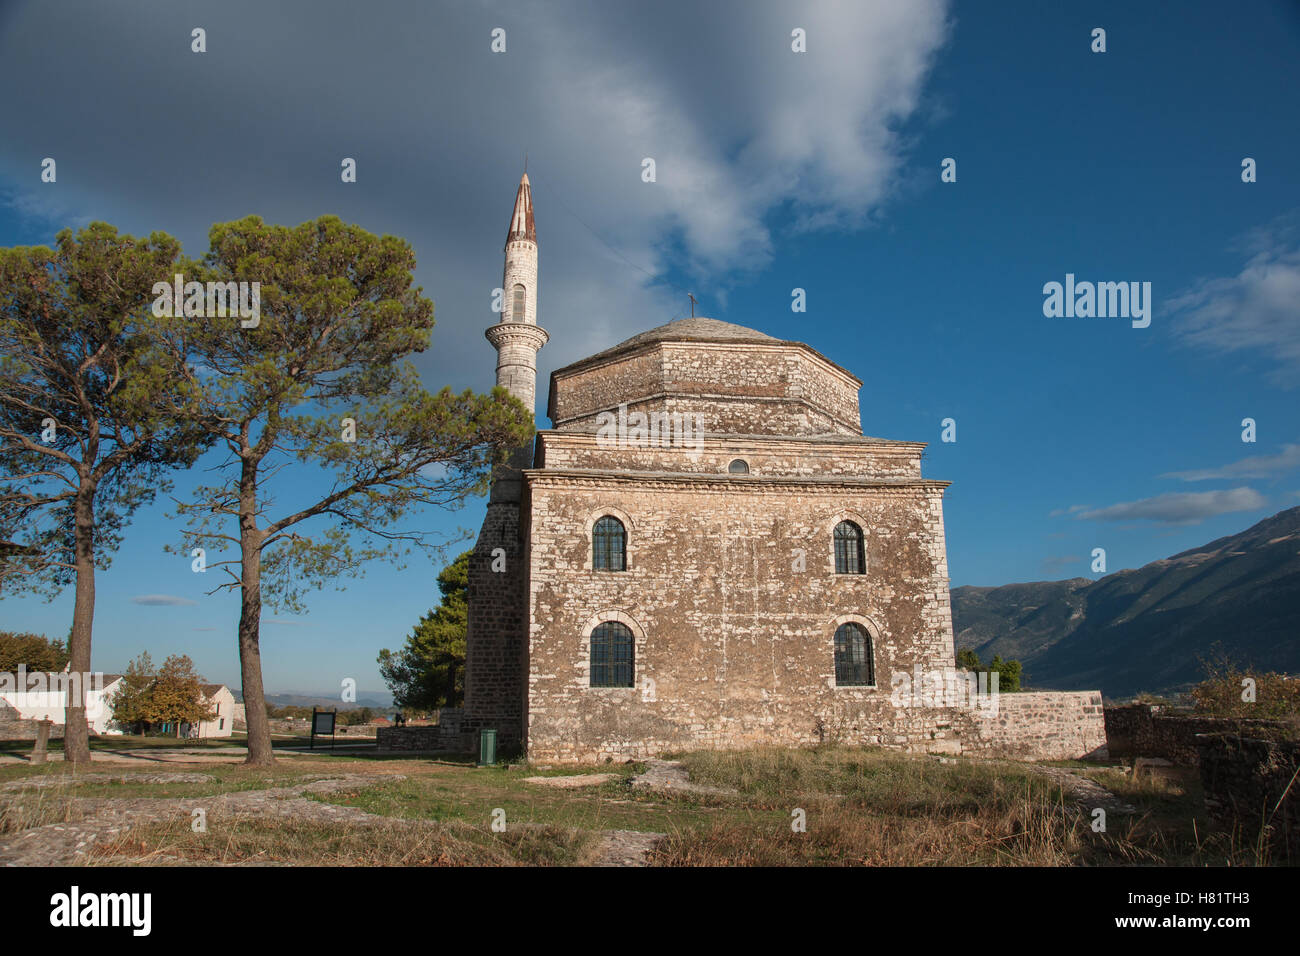 The Fethiye Mosque in Ioannina, Greece Stock Photo